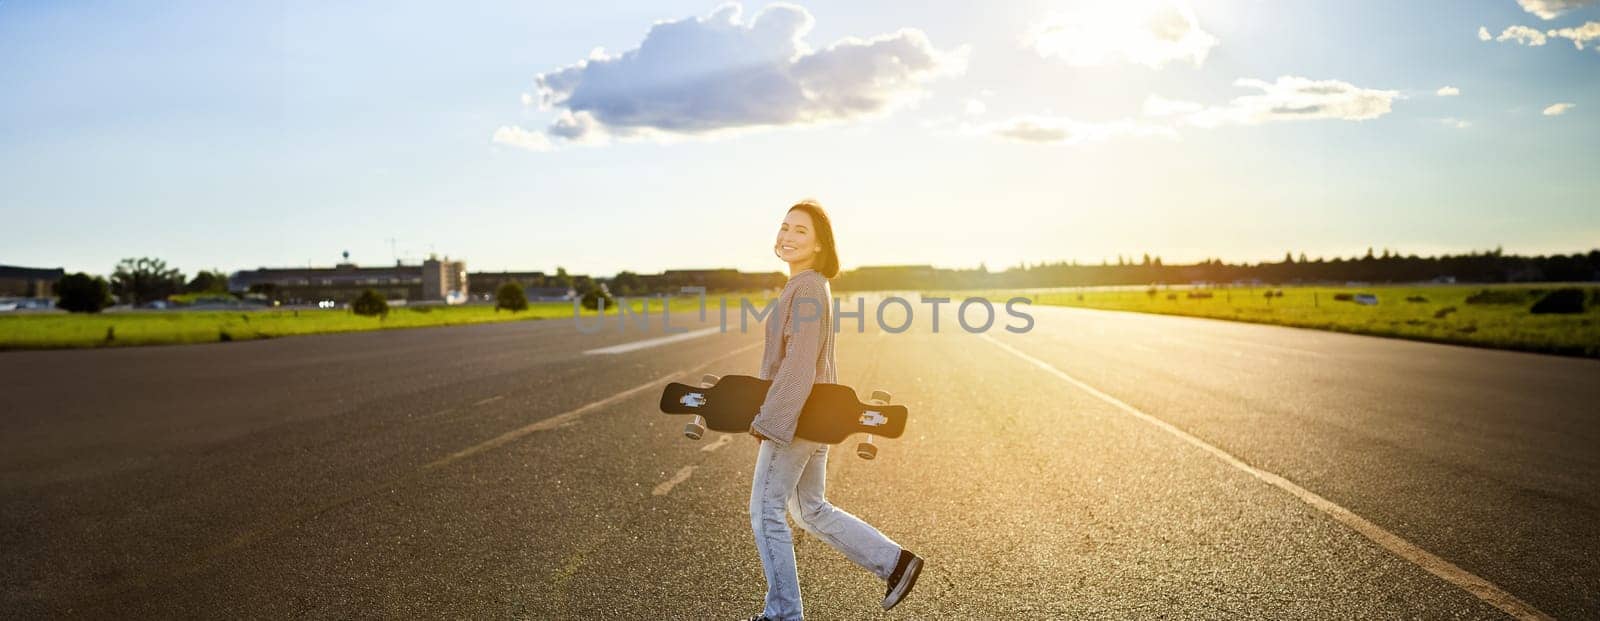 Asian girl with skateboard standing on road during sunset. Skater posing with her long board, cruiser deck during training.